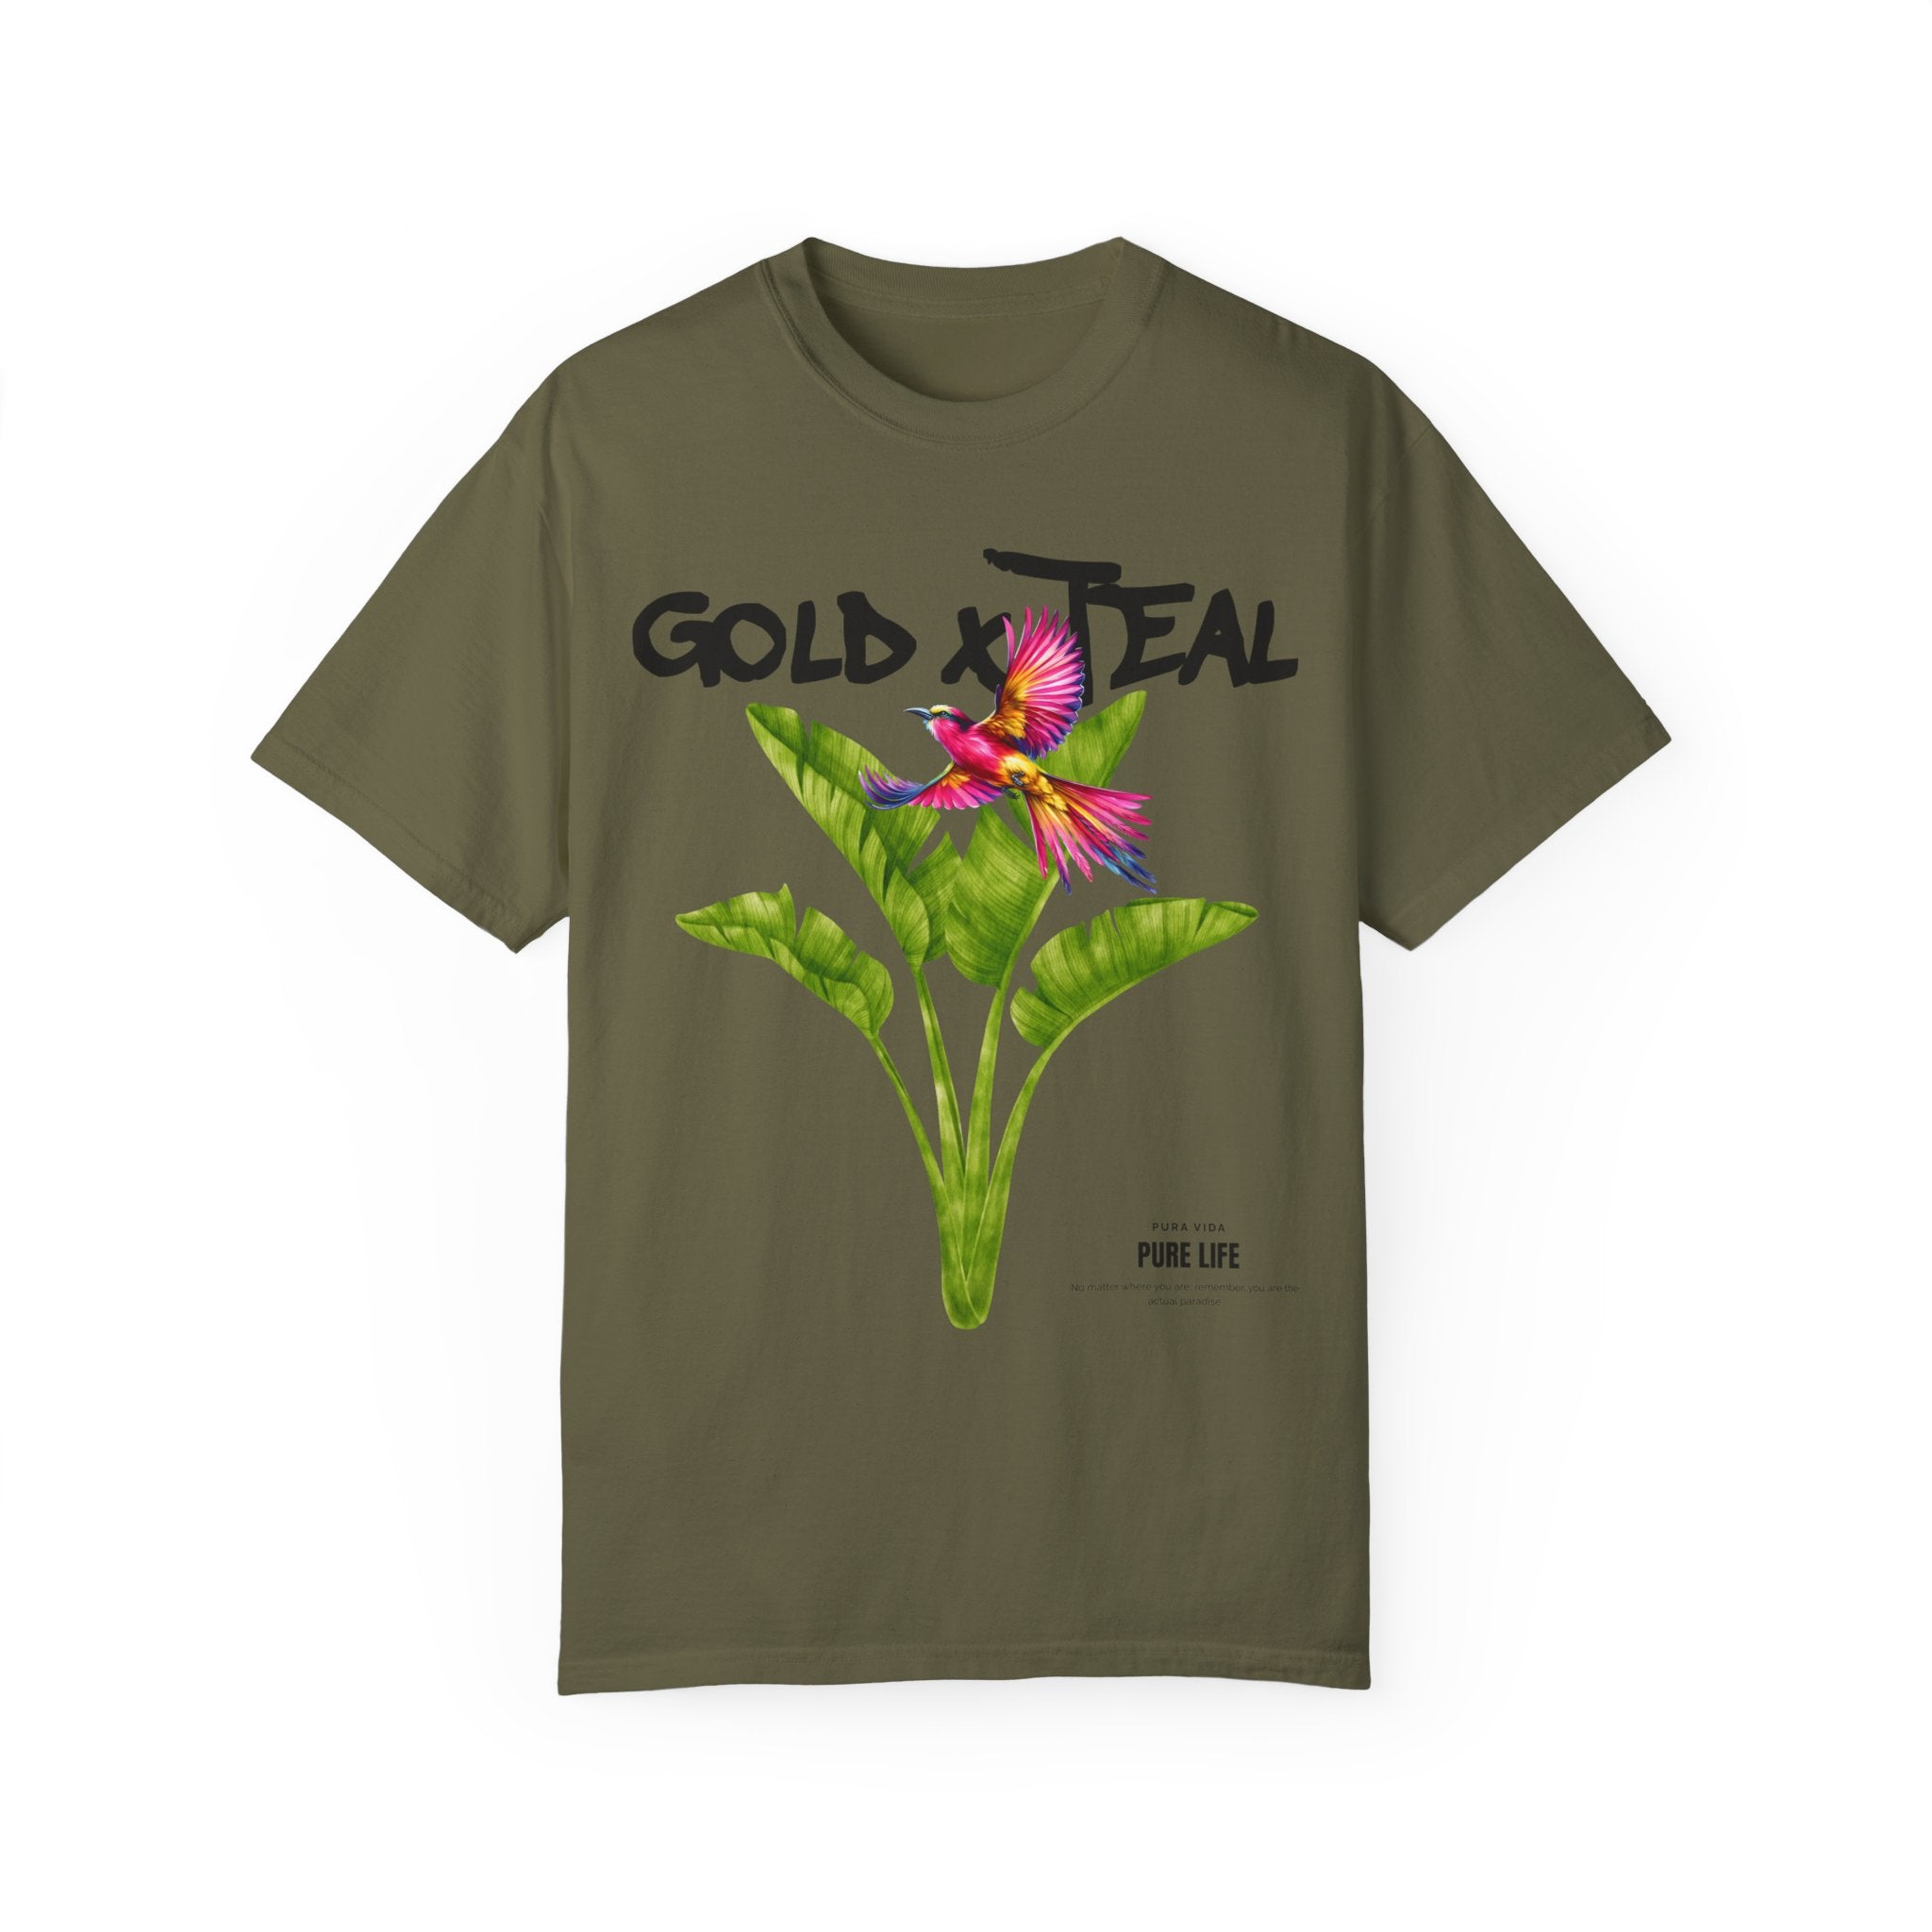 GOLDxTEAL colorful and bold tropical graphic t-shirt.